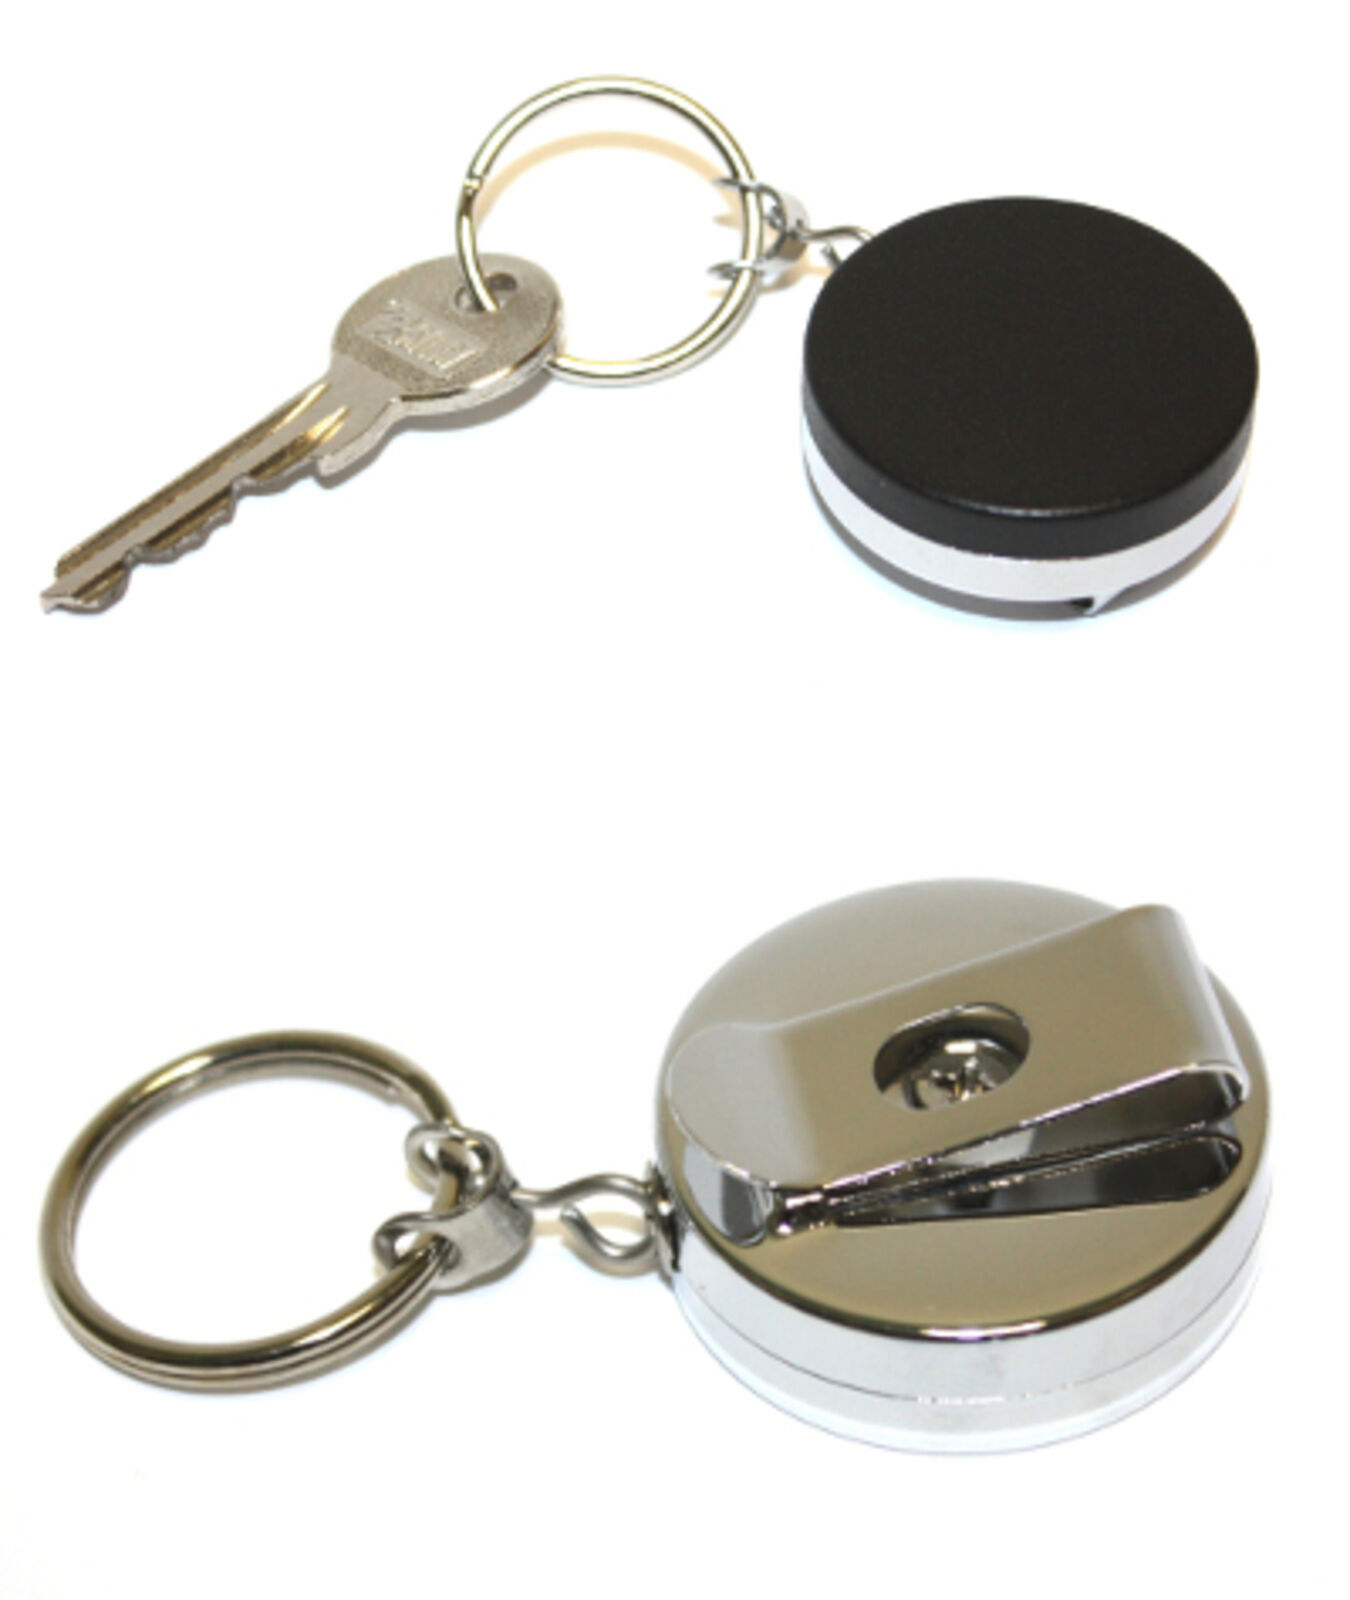 Rollmatic famous rollmatik Key Discount is also underway Chain waiters Piece 2 Keyring need